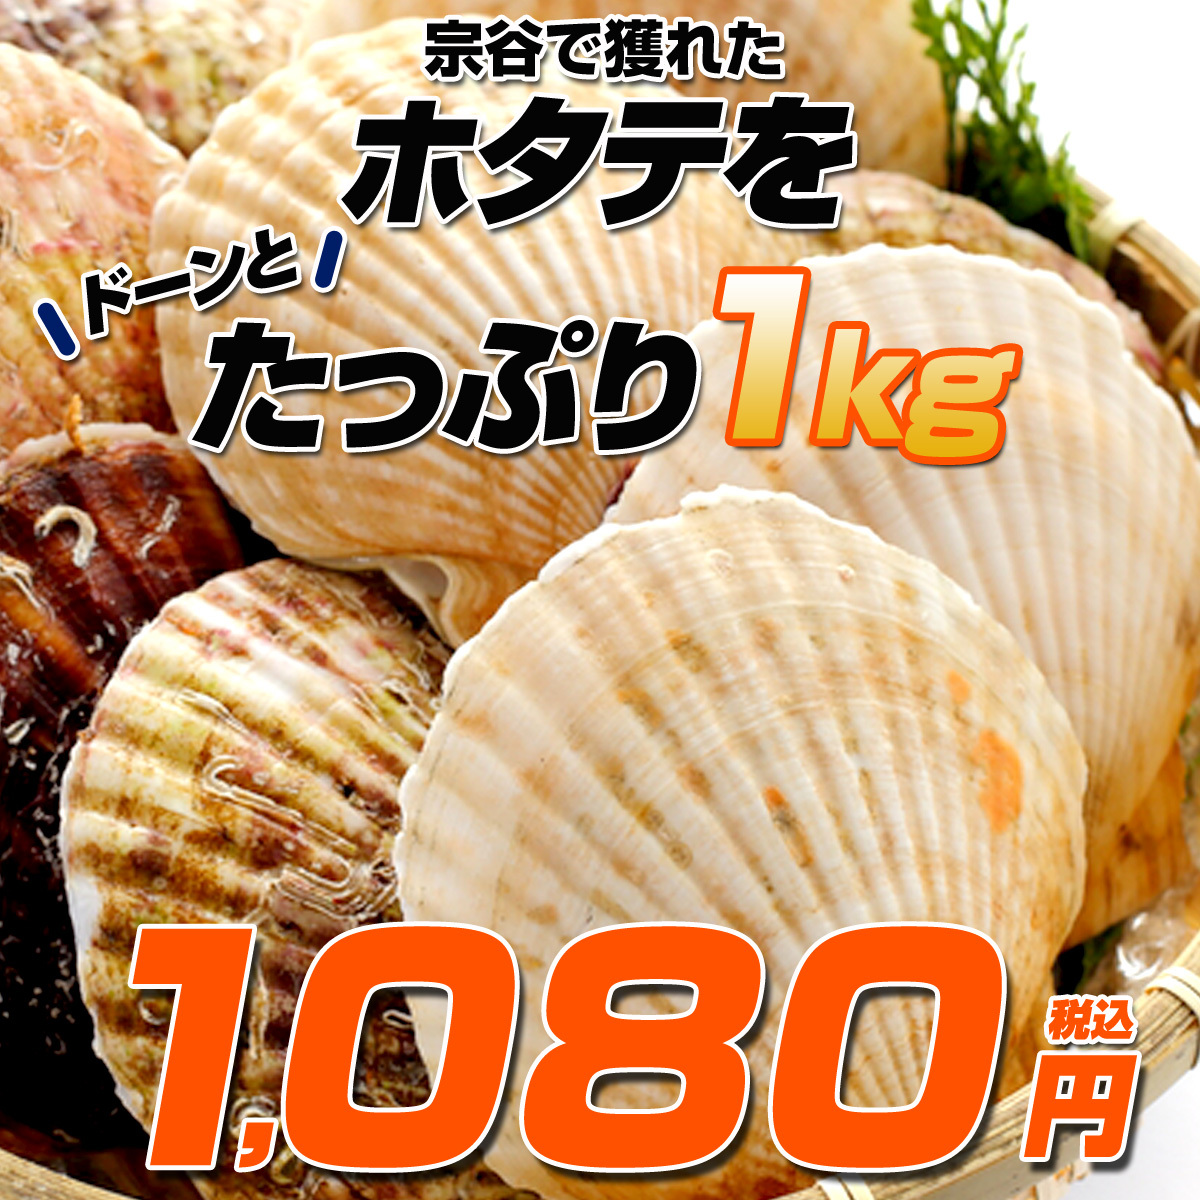 [ Hokkaido production ] scallop 1kg |.. district 4~6 sheets degree freezing both . scallop ... attaching scallop . attaching scallop Hokkaido production .. Bon Festival gift Father's day gift 